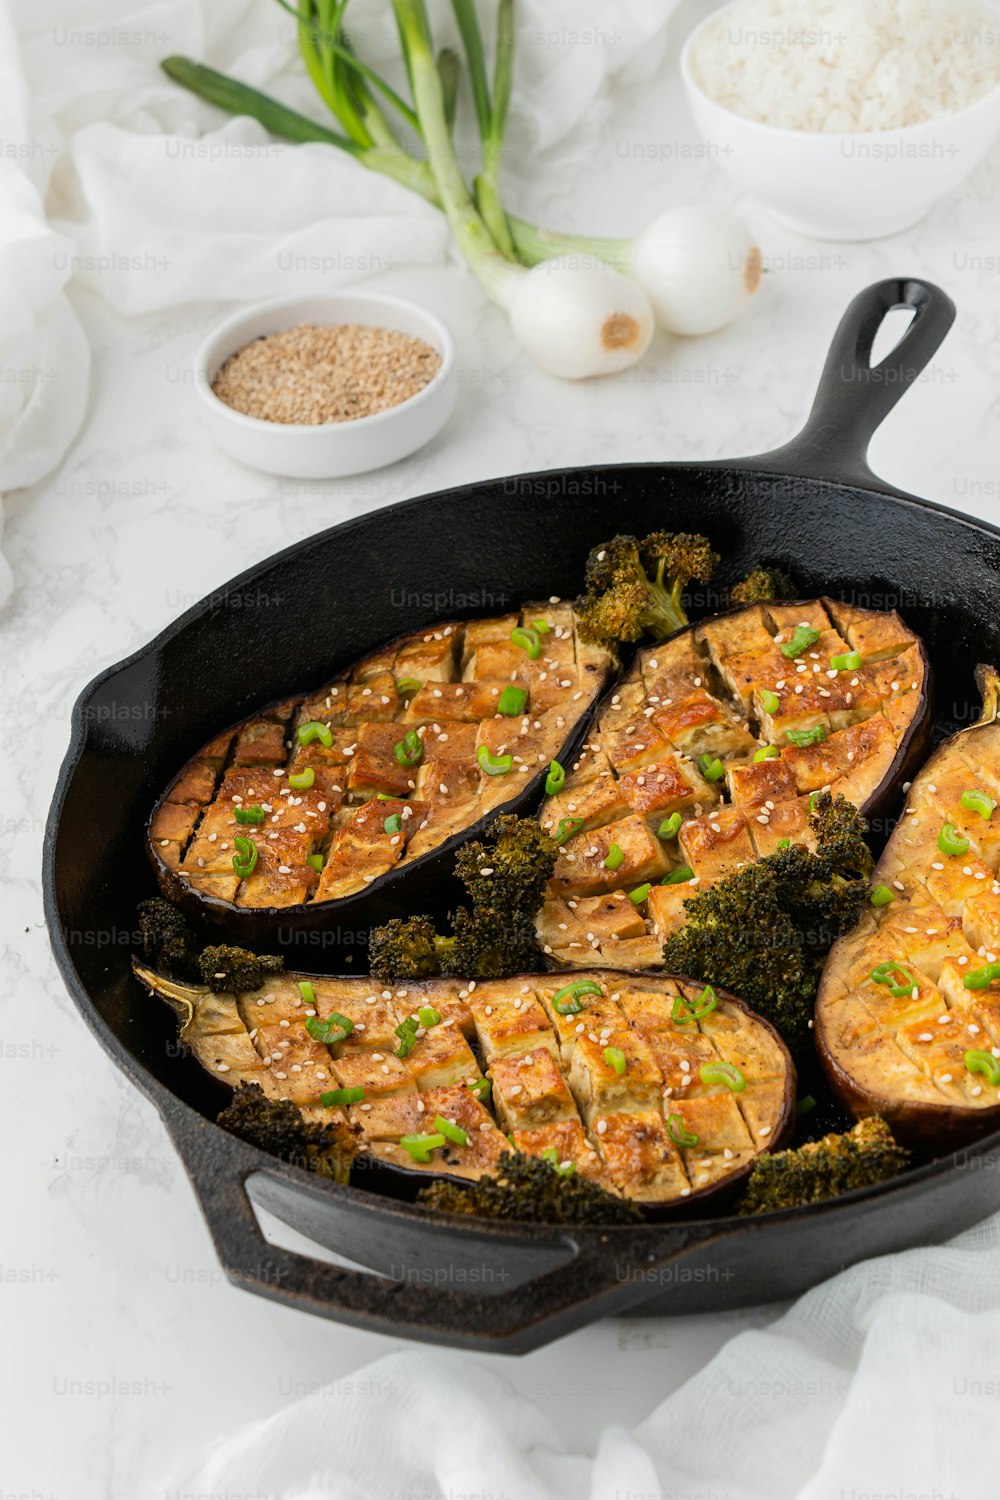 a pan filled with chicken and broccoli covered in sesame seeds